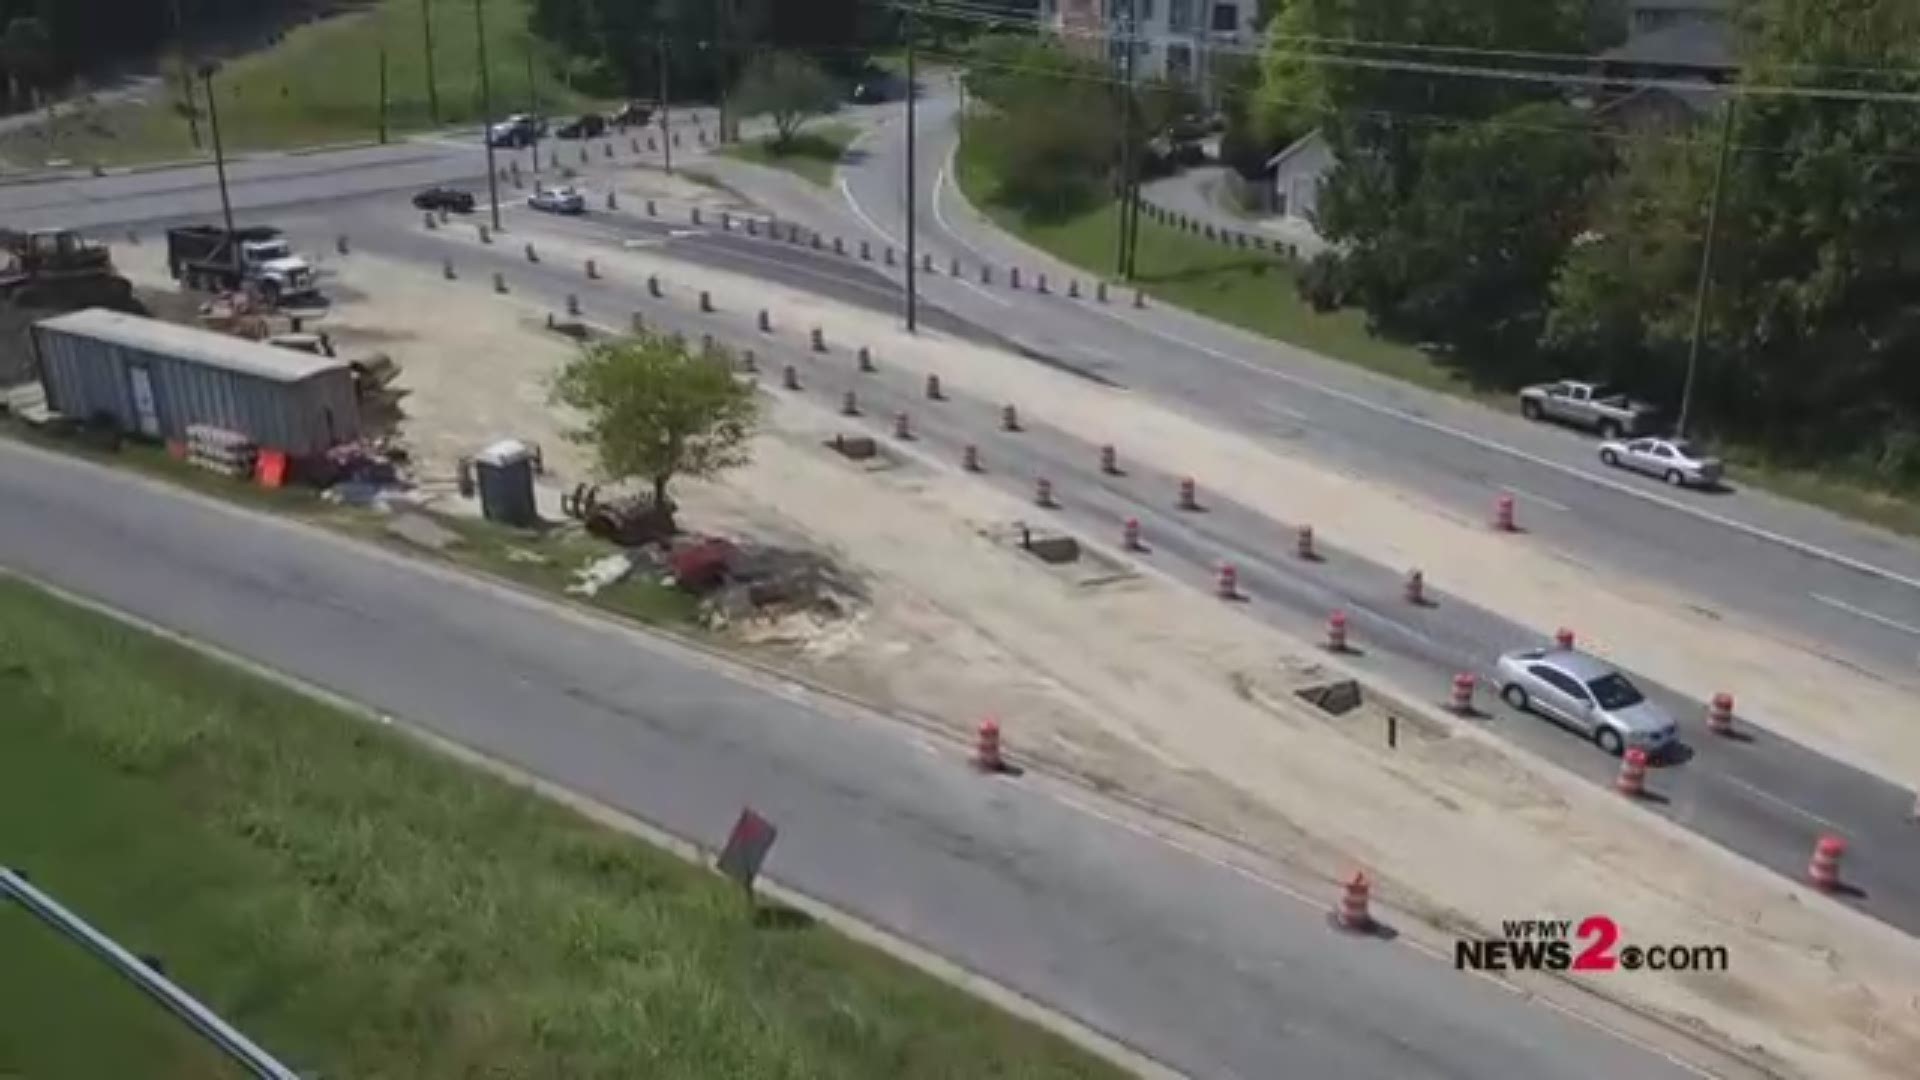 There’s a new traffic pattern at the intersection of Gate City Boulevard and Murrow Boulevard in Greensboro.